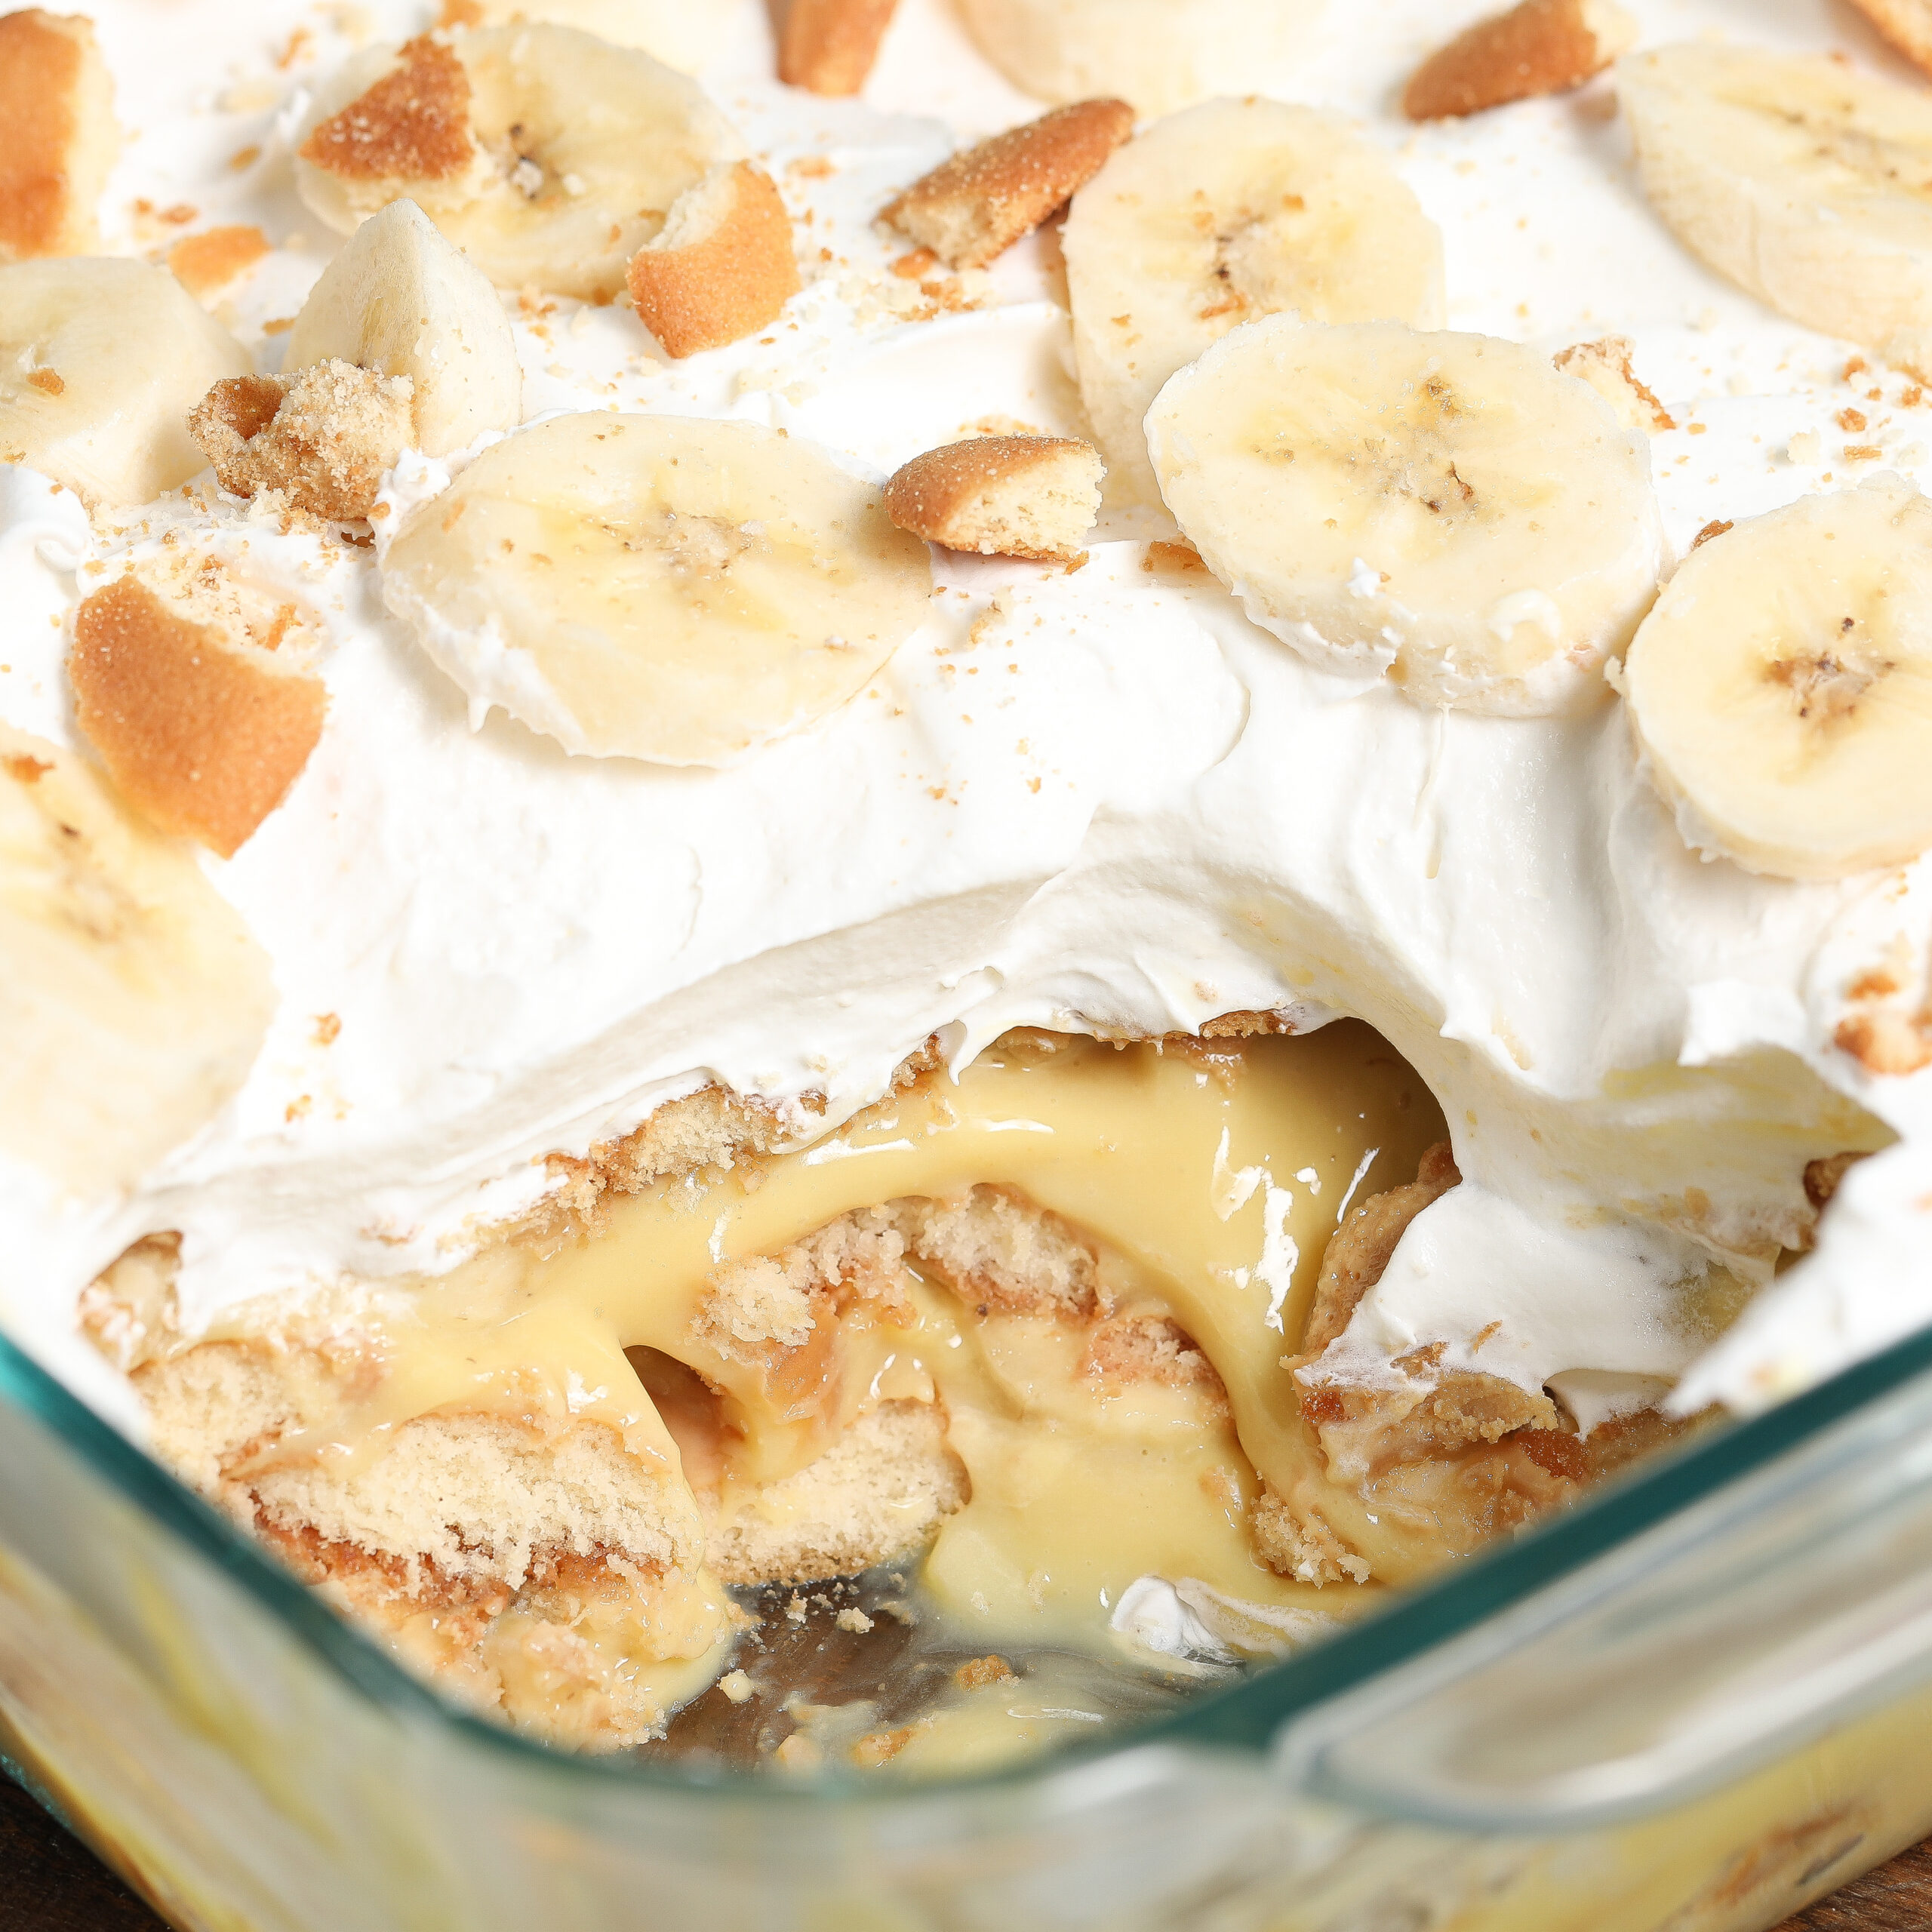  Banana Pudding with Peanut Butter 